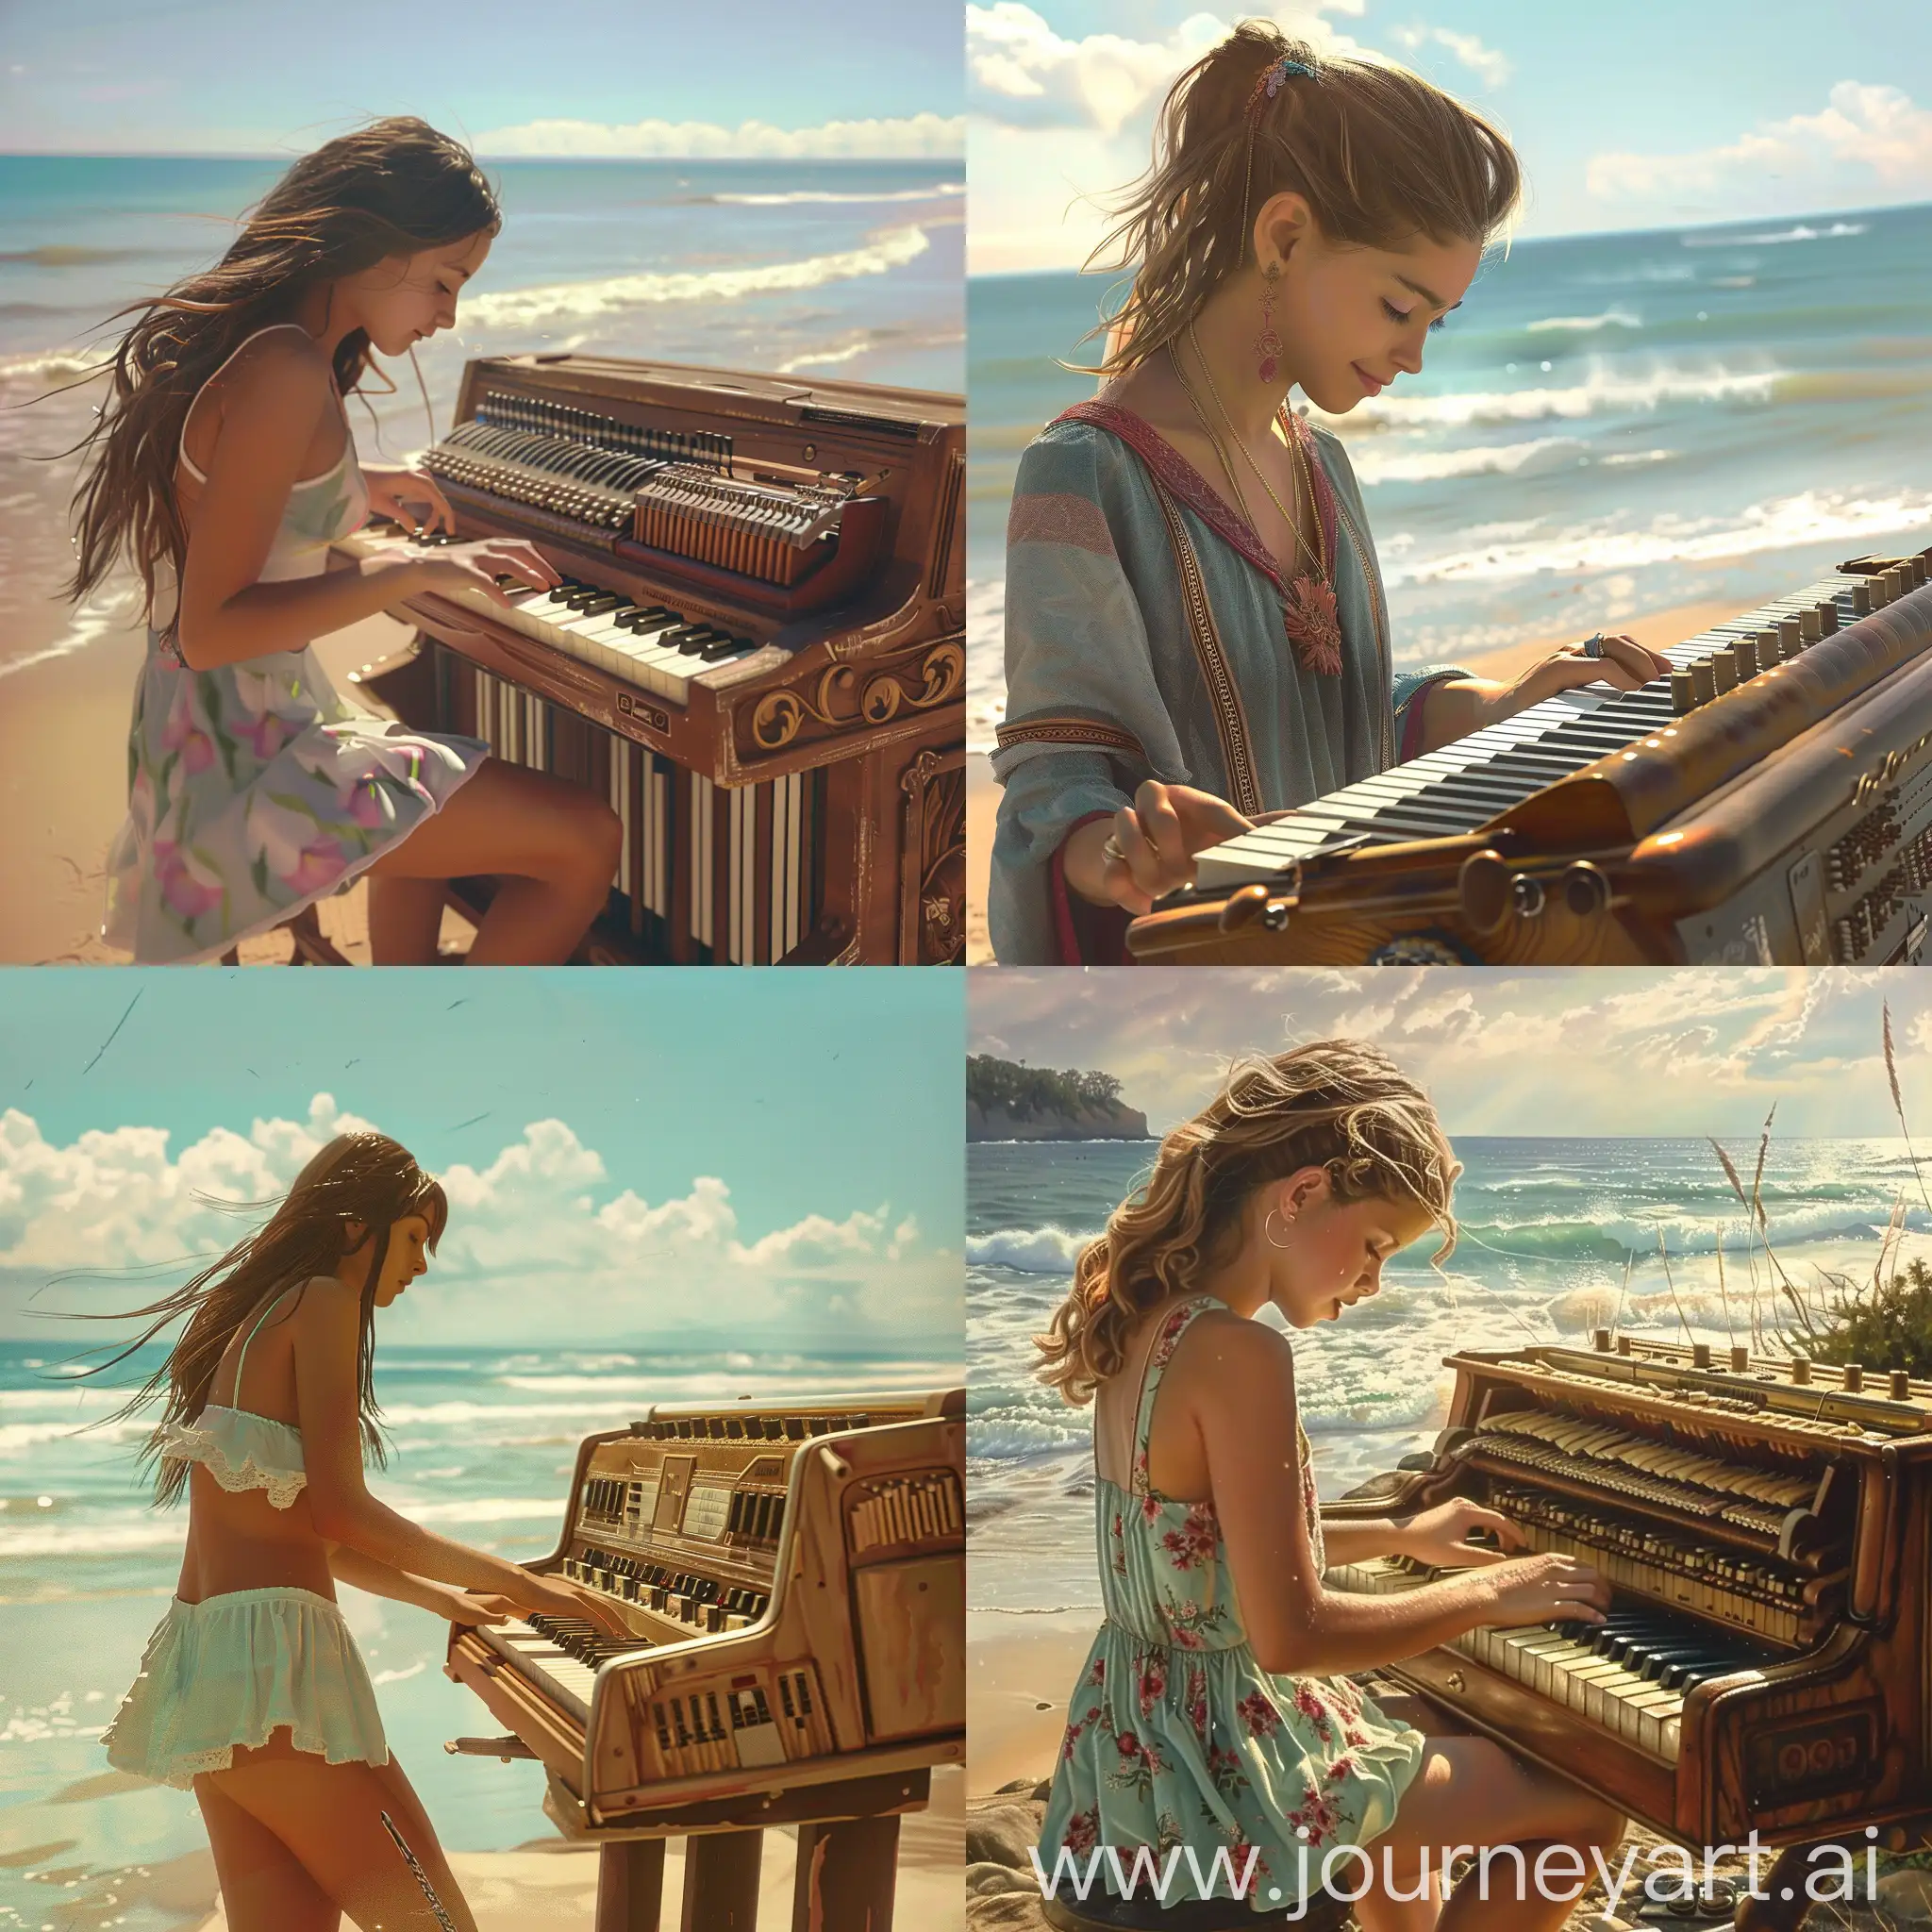 A girl playing an organ on the beach, very photorealistic